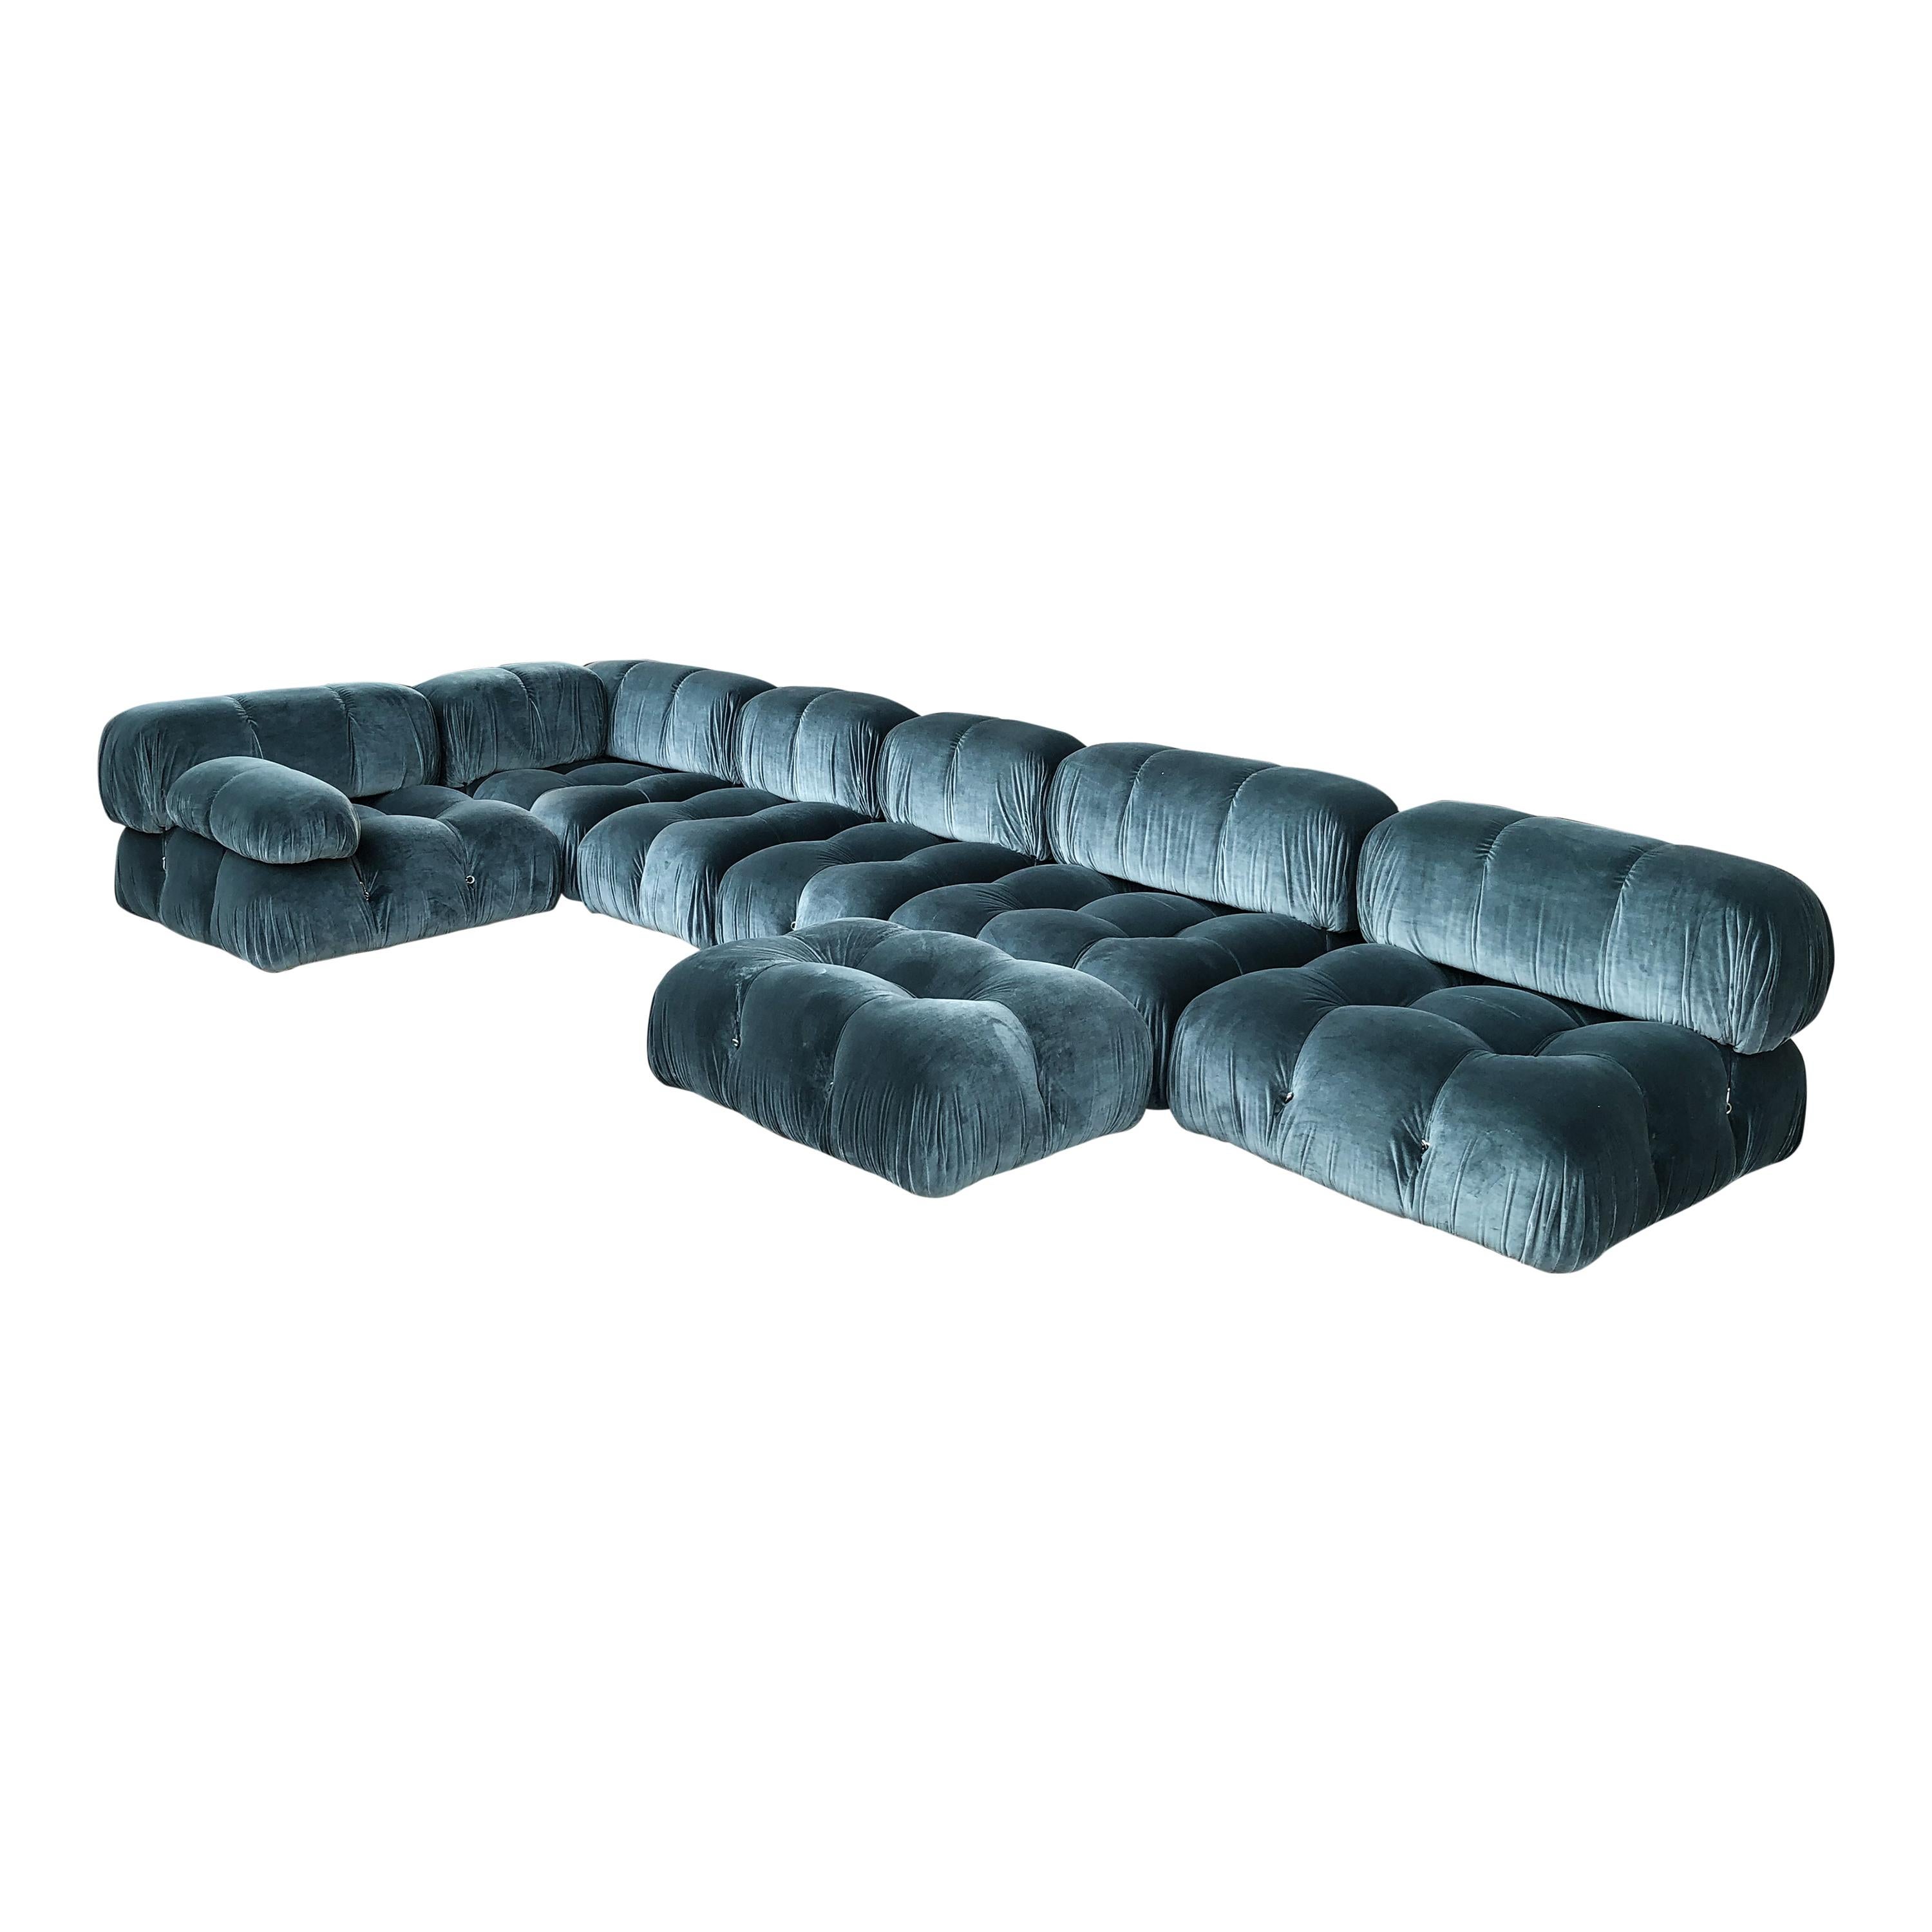 Camaleonda sofa, designed by Mario Bellini and manufactured by B&B Italia in 1972.
The set features seven modules with backrest (four big modules and three small ones) and one armrest.
High-quality blue cotton velvet upholstery by Mark